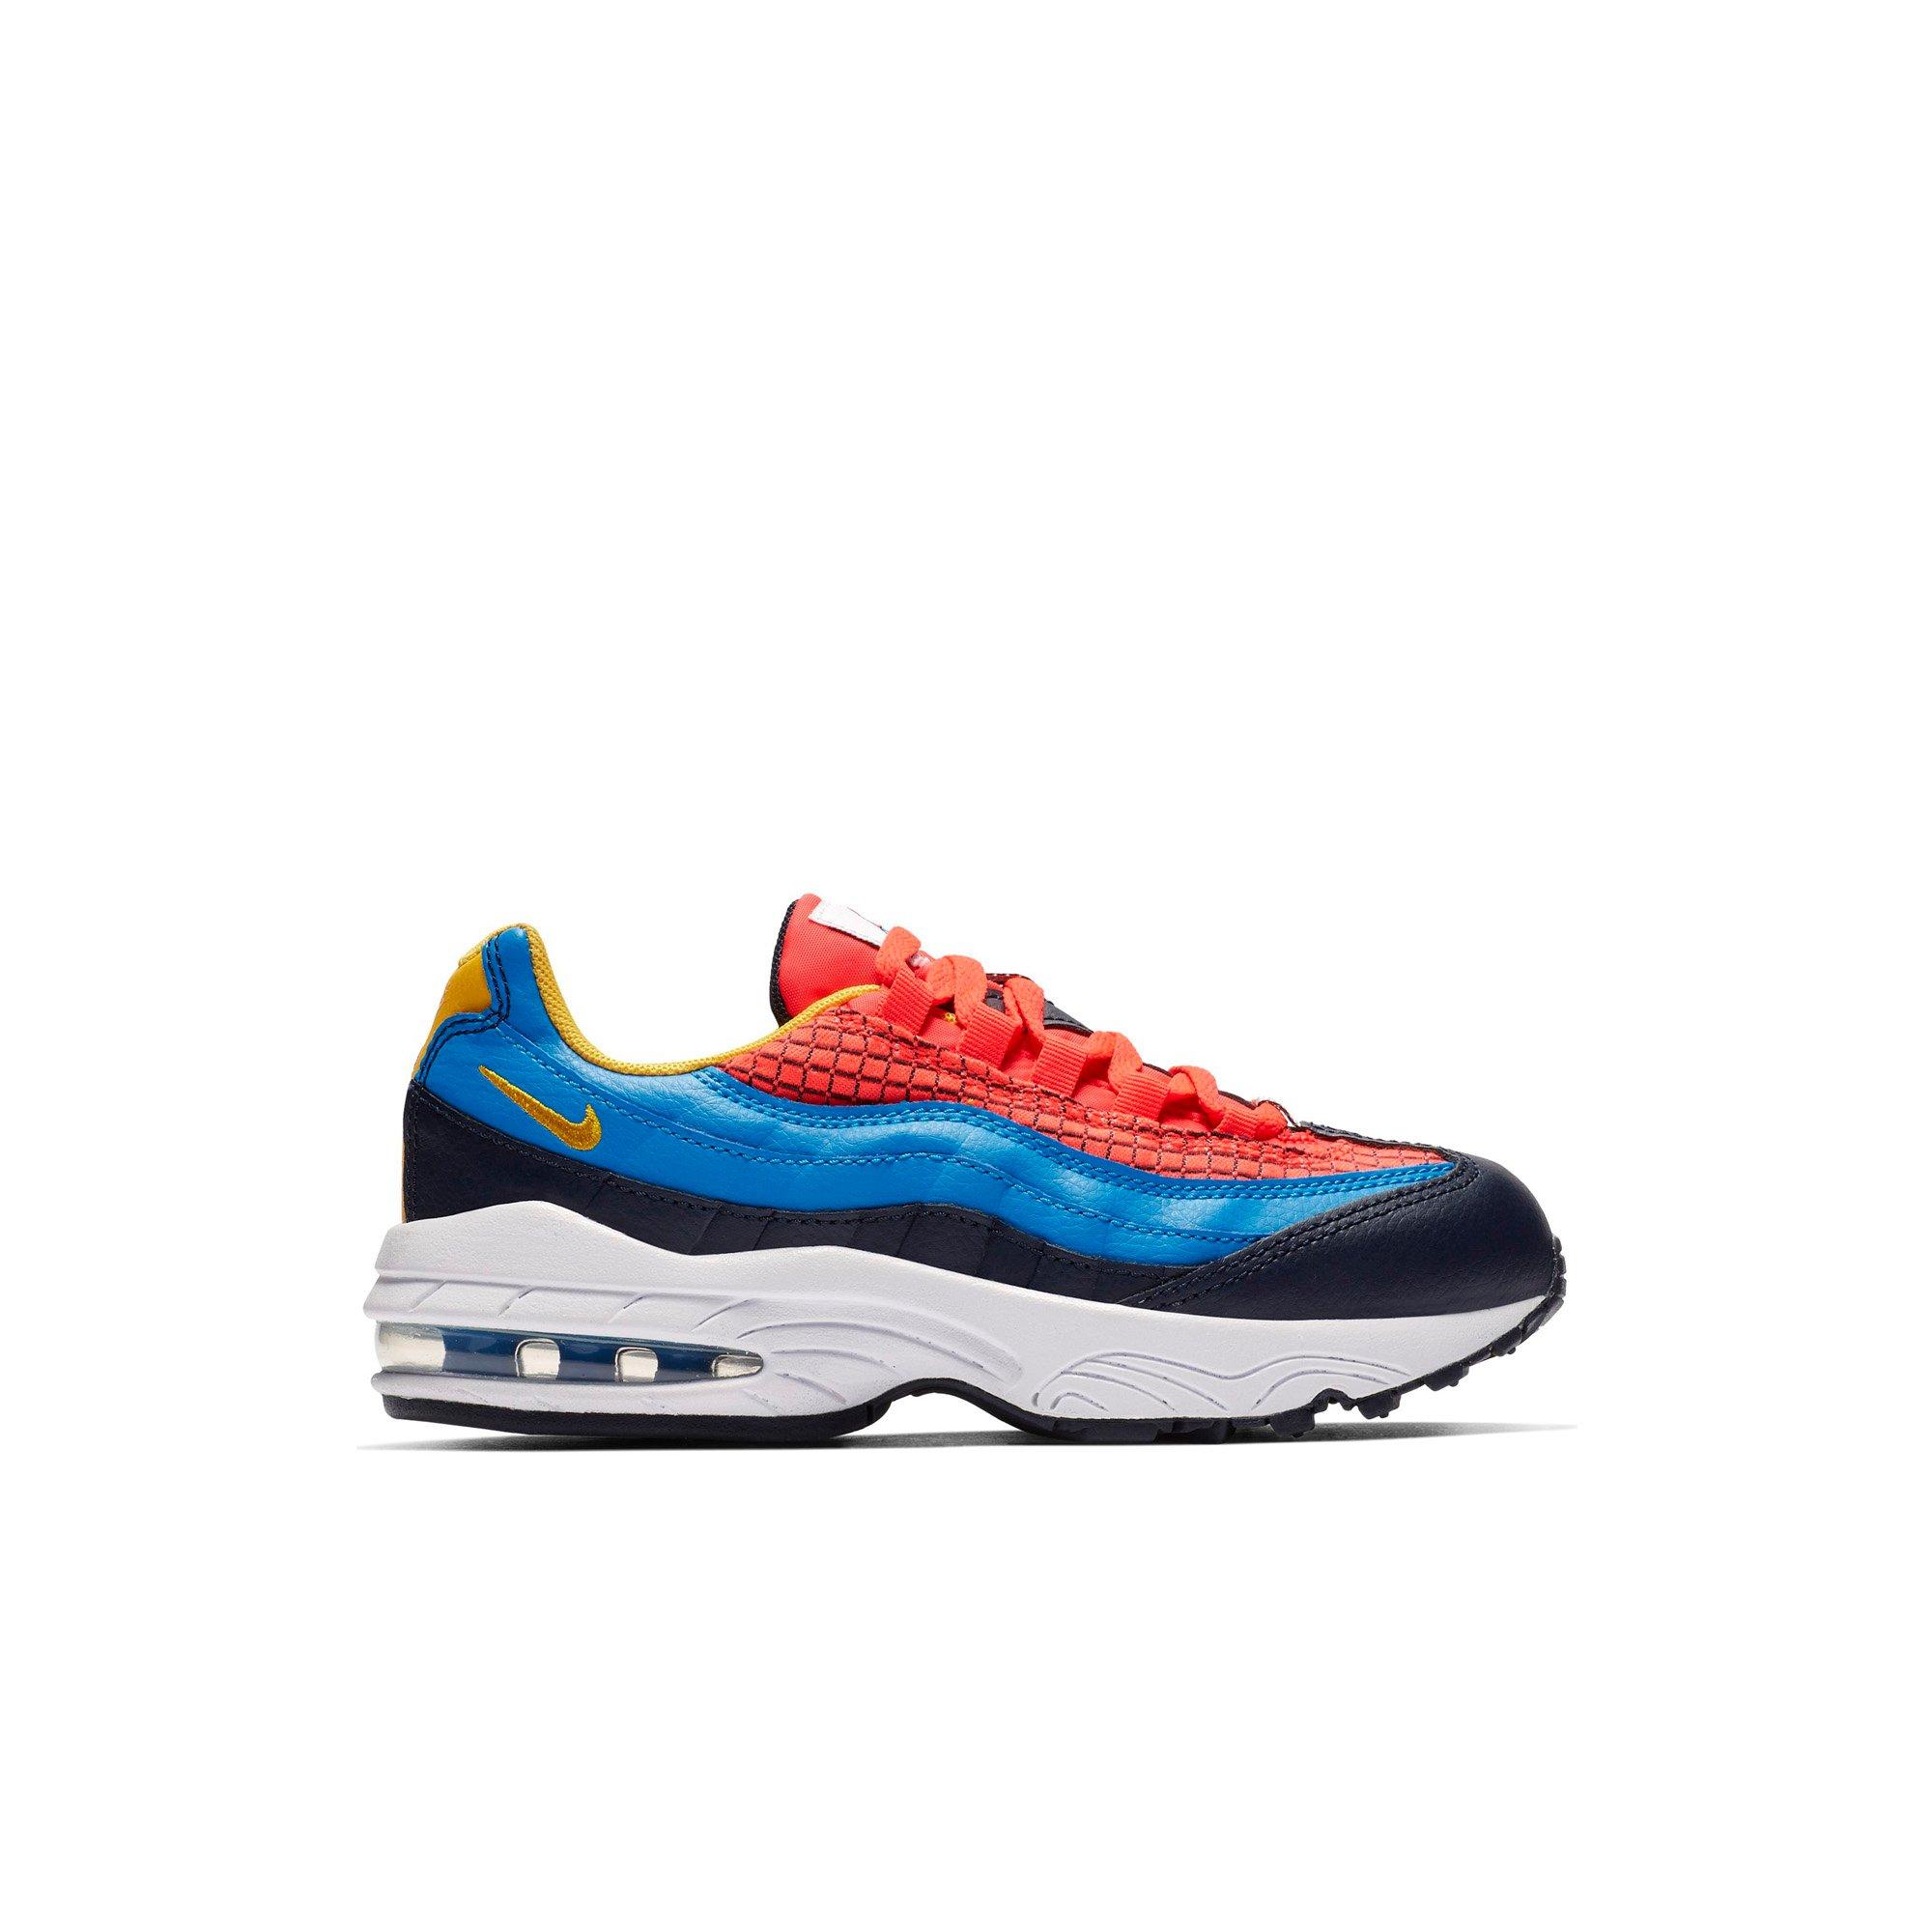 red yellow blue air max 95